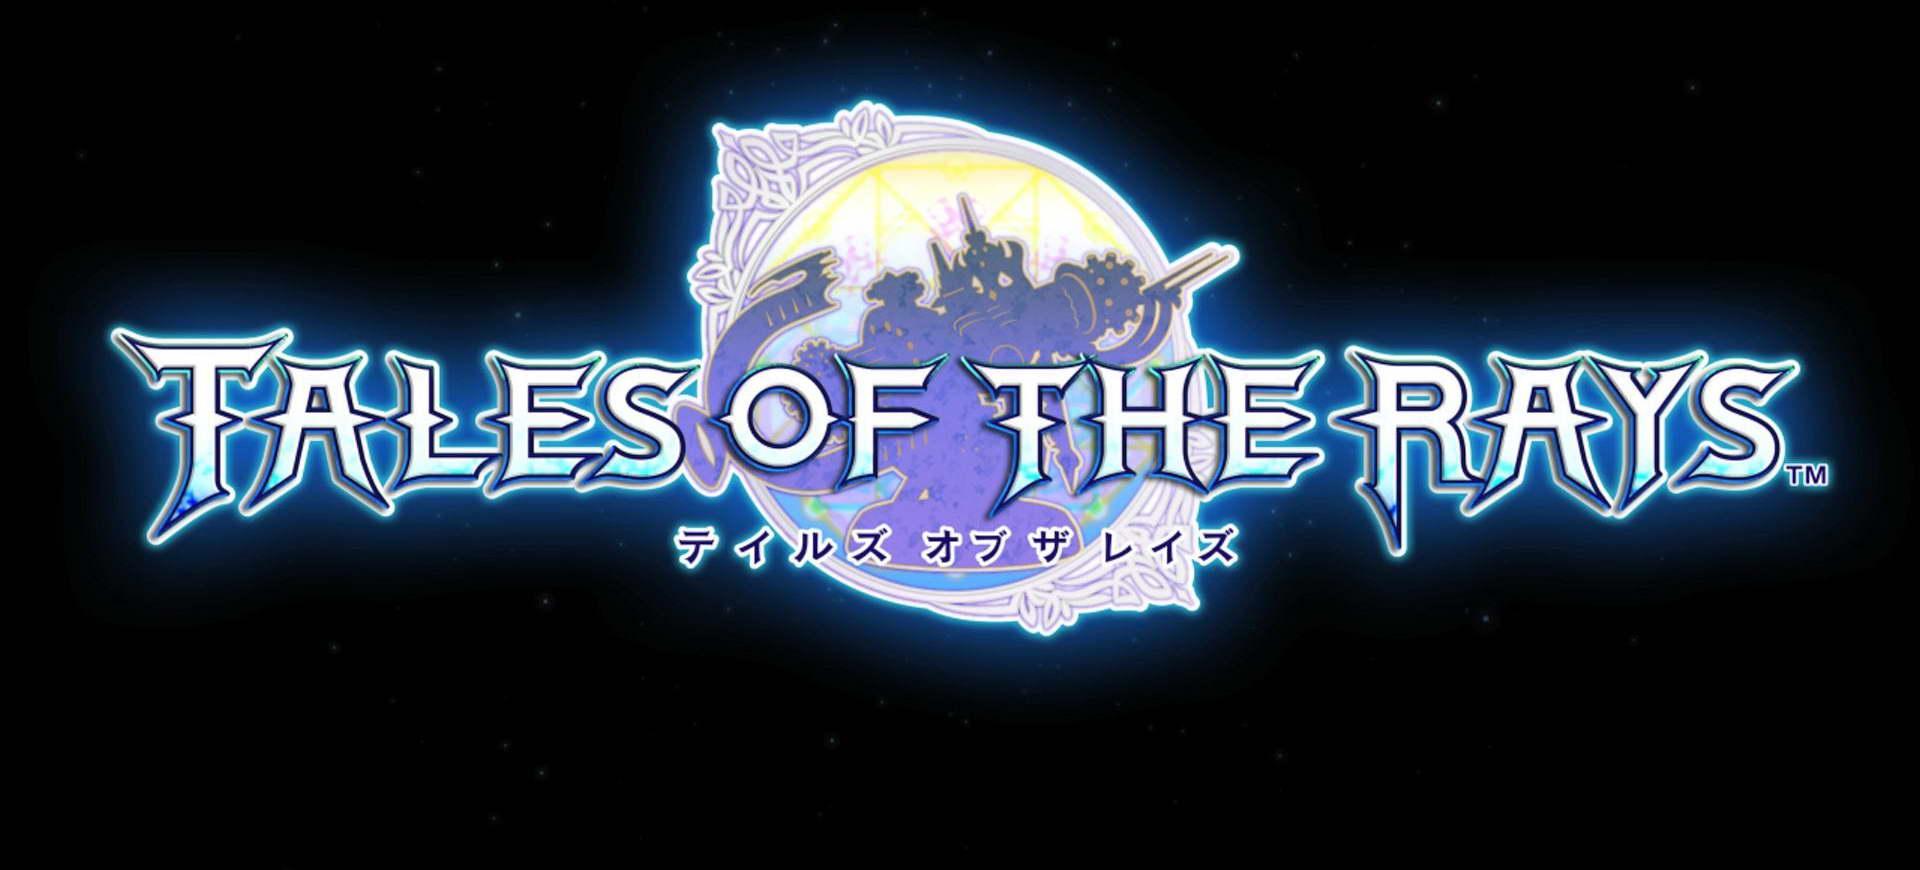 Tales of the Rays ra mắt trailer thứ hai - Tin Game Mobile